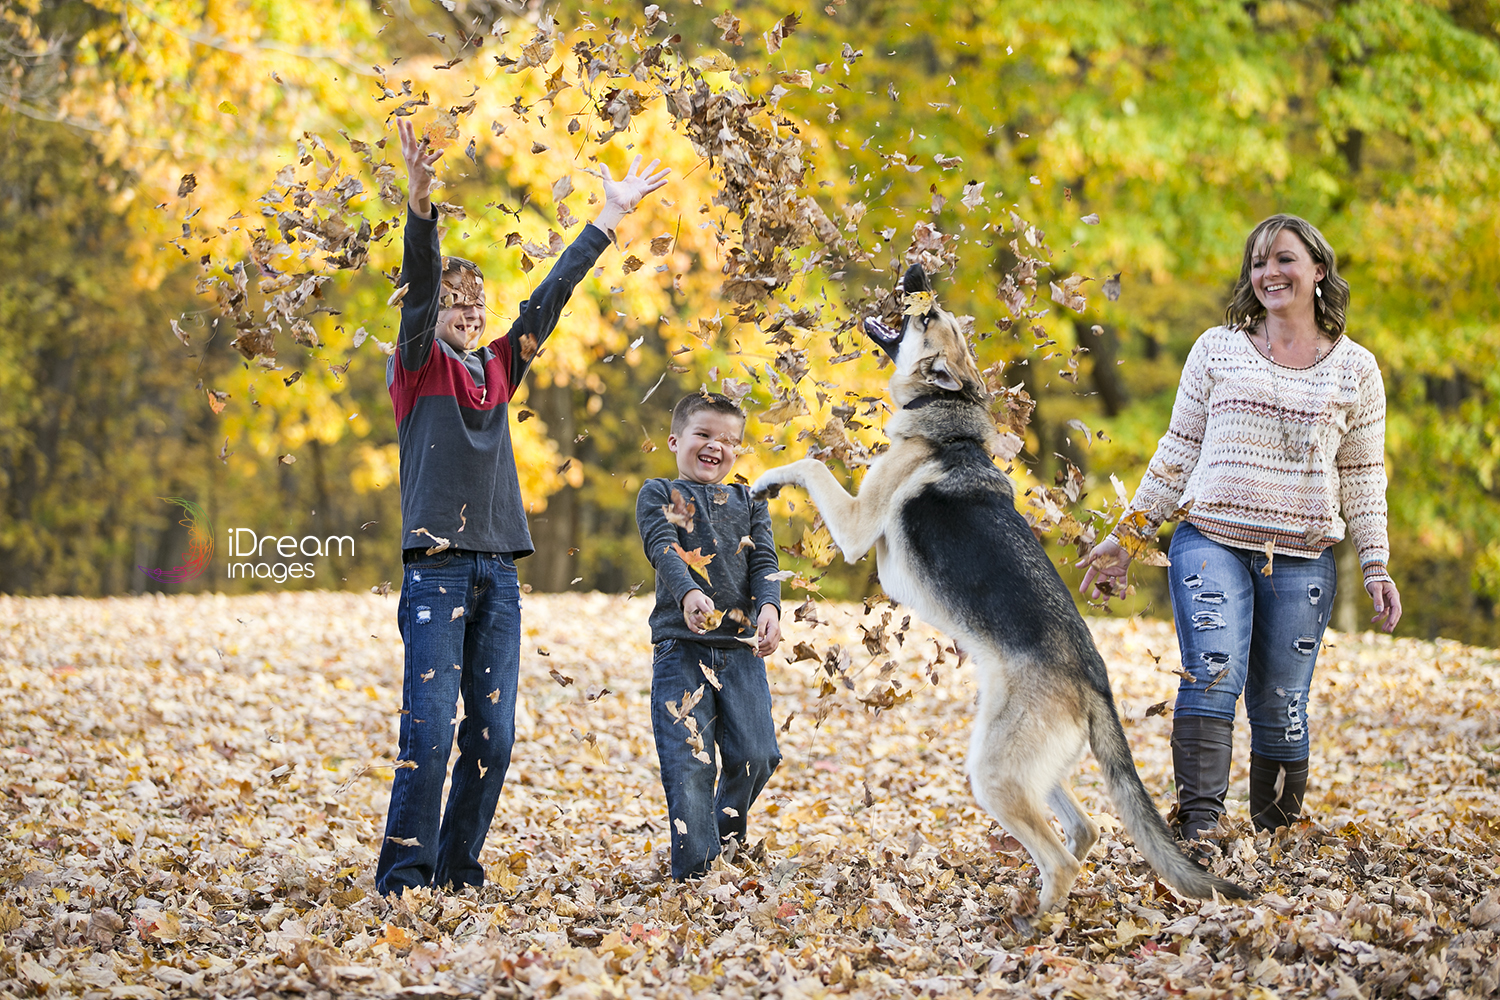 Chillicothe Family Photographer